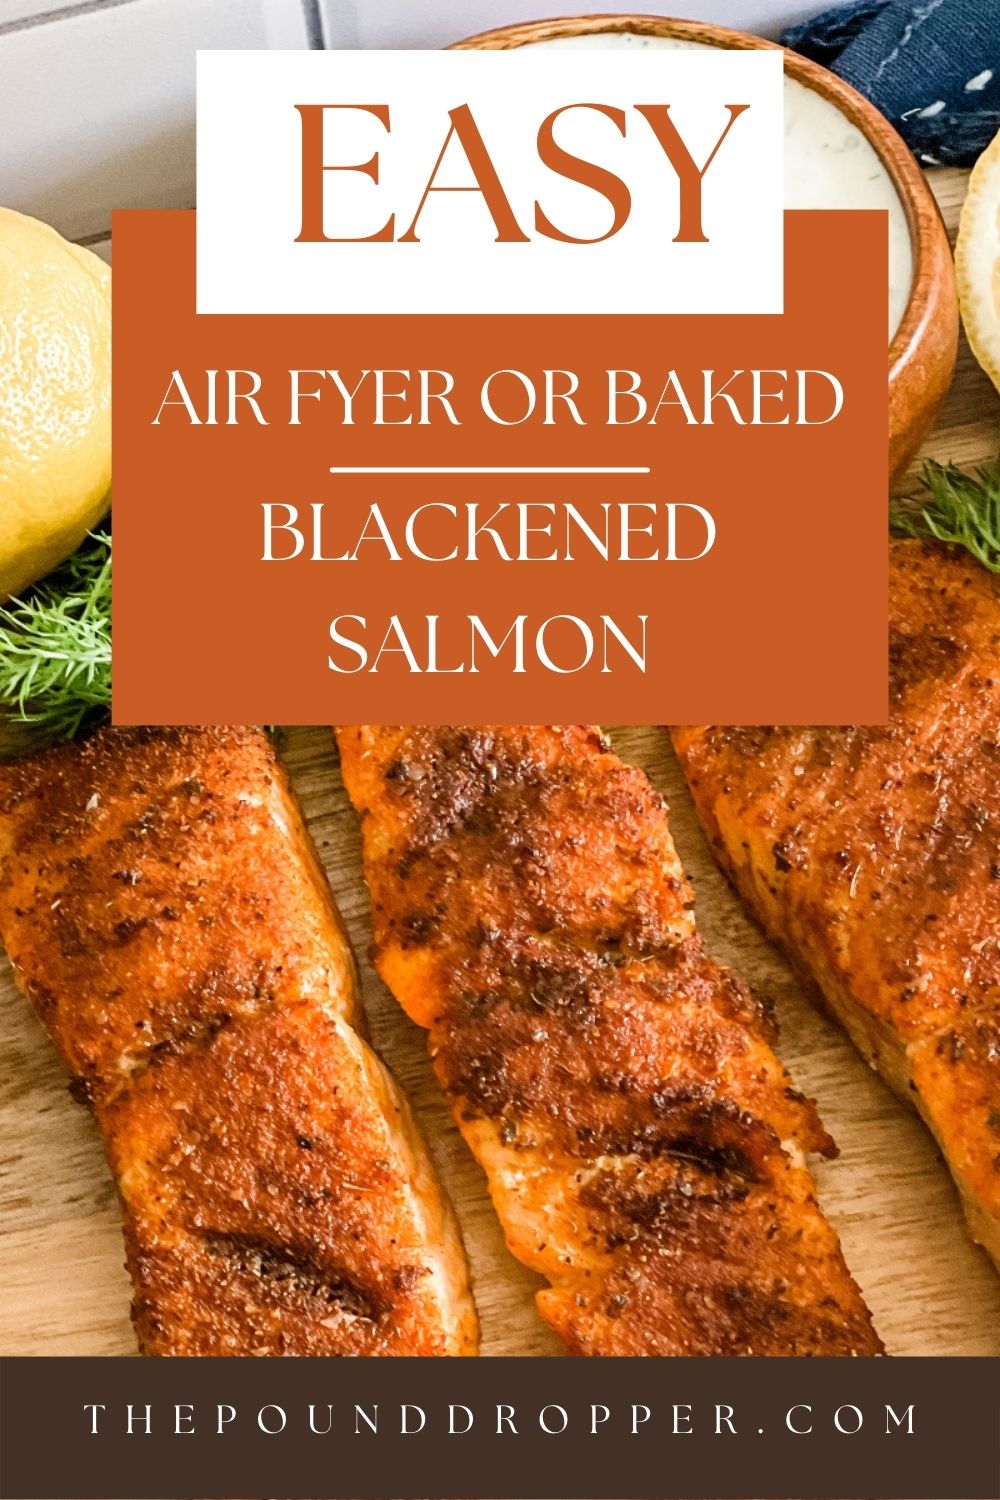 This Easy and Delicious Blackened Salmon is seasoned using a homemade spice blend-making for a crispy flavorful salmon. It's easy to make and requires just a few simple ingredients! A restaurant-quality-flaky, moist, and ready in less than 20 minutes! via @pounddropper